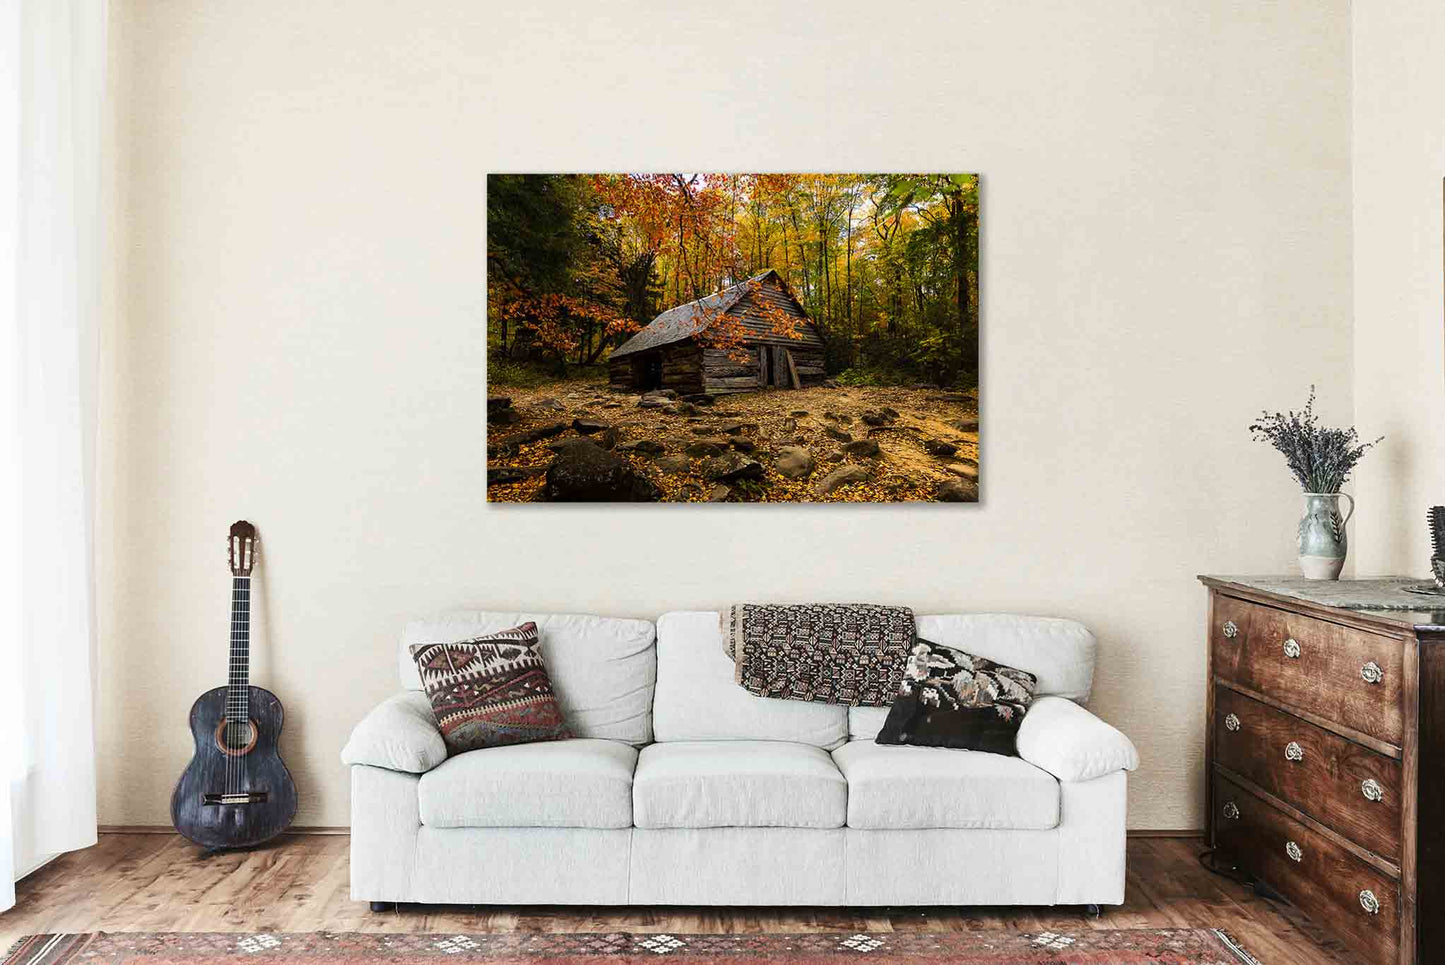 Country Canvas Wall Art (Ready to Hang) Gallery Wrap of Old Barn Surrounded by Fall Foliage on Autumn Day in Tennessee Great Smoky Mountains Photography Rustic Decor